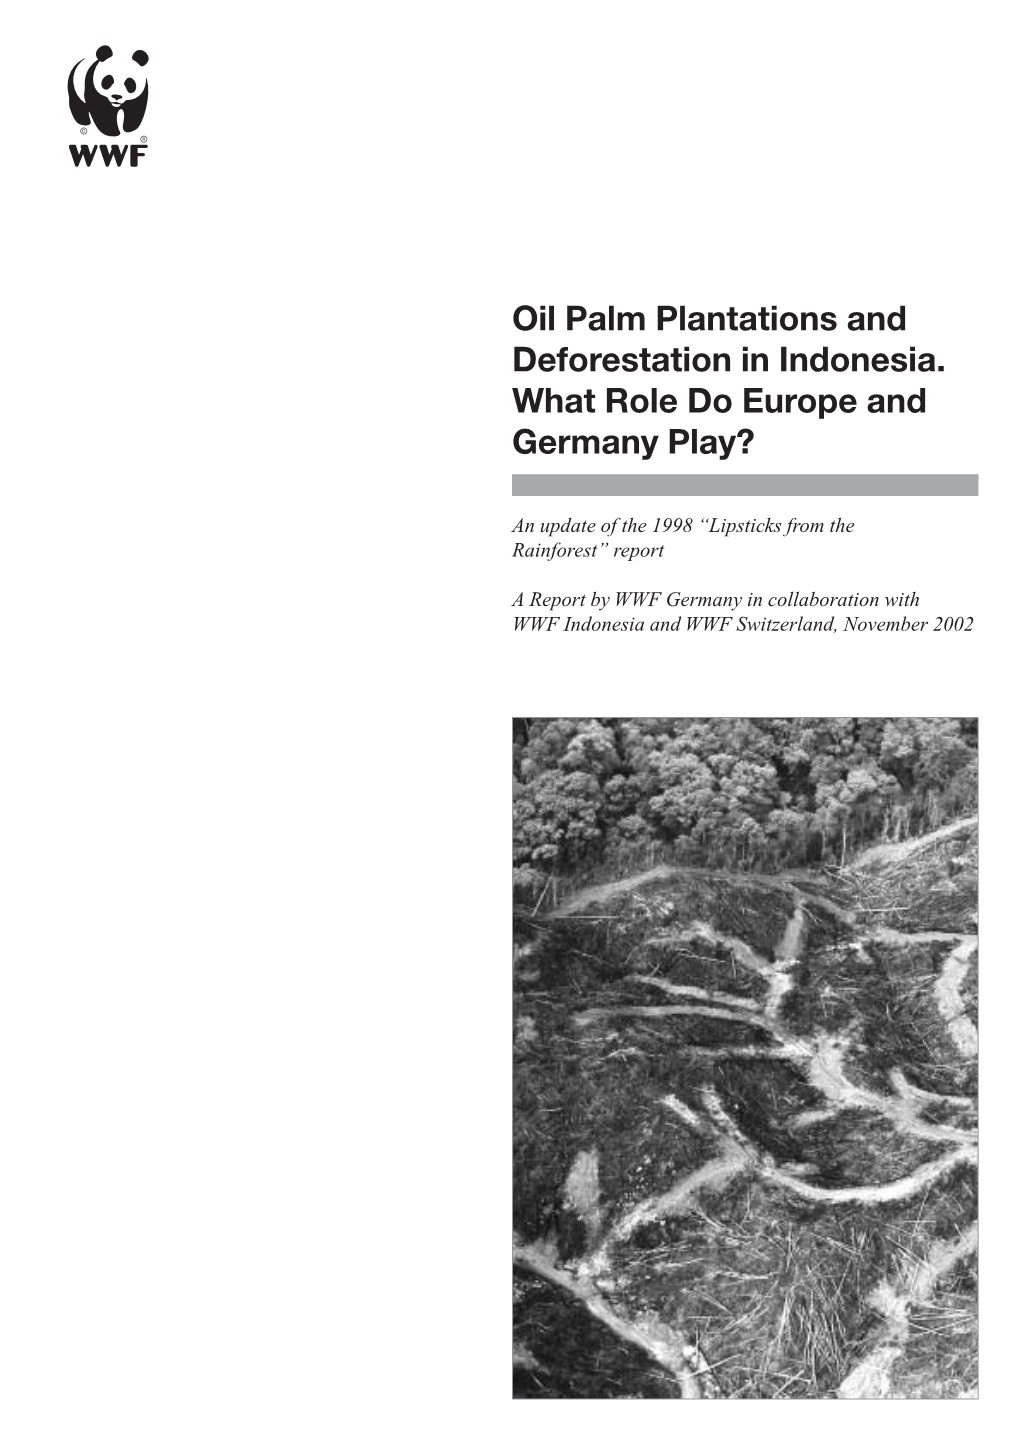 Oil Palm Plantations and Deforestation in Indonesia. What Role Do Europe and Germany Play?